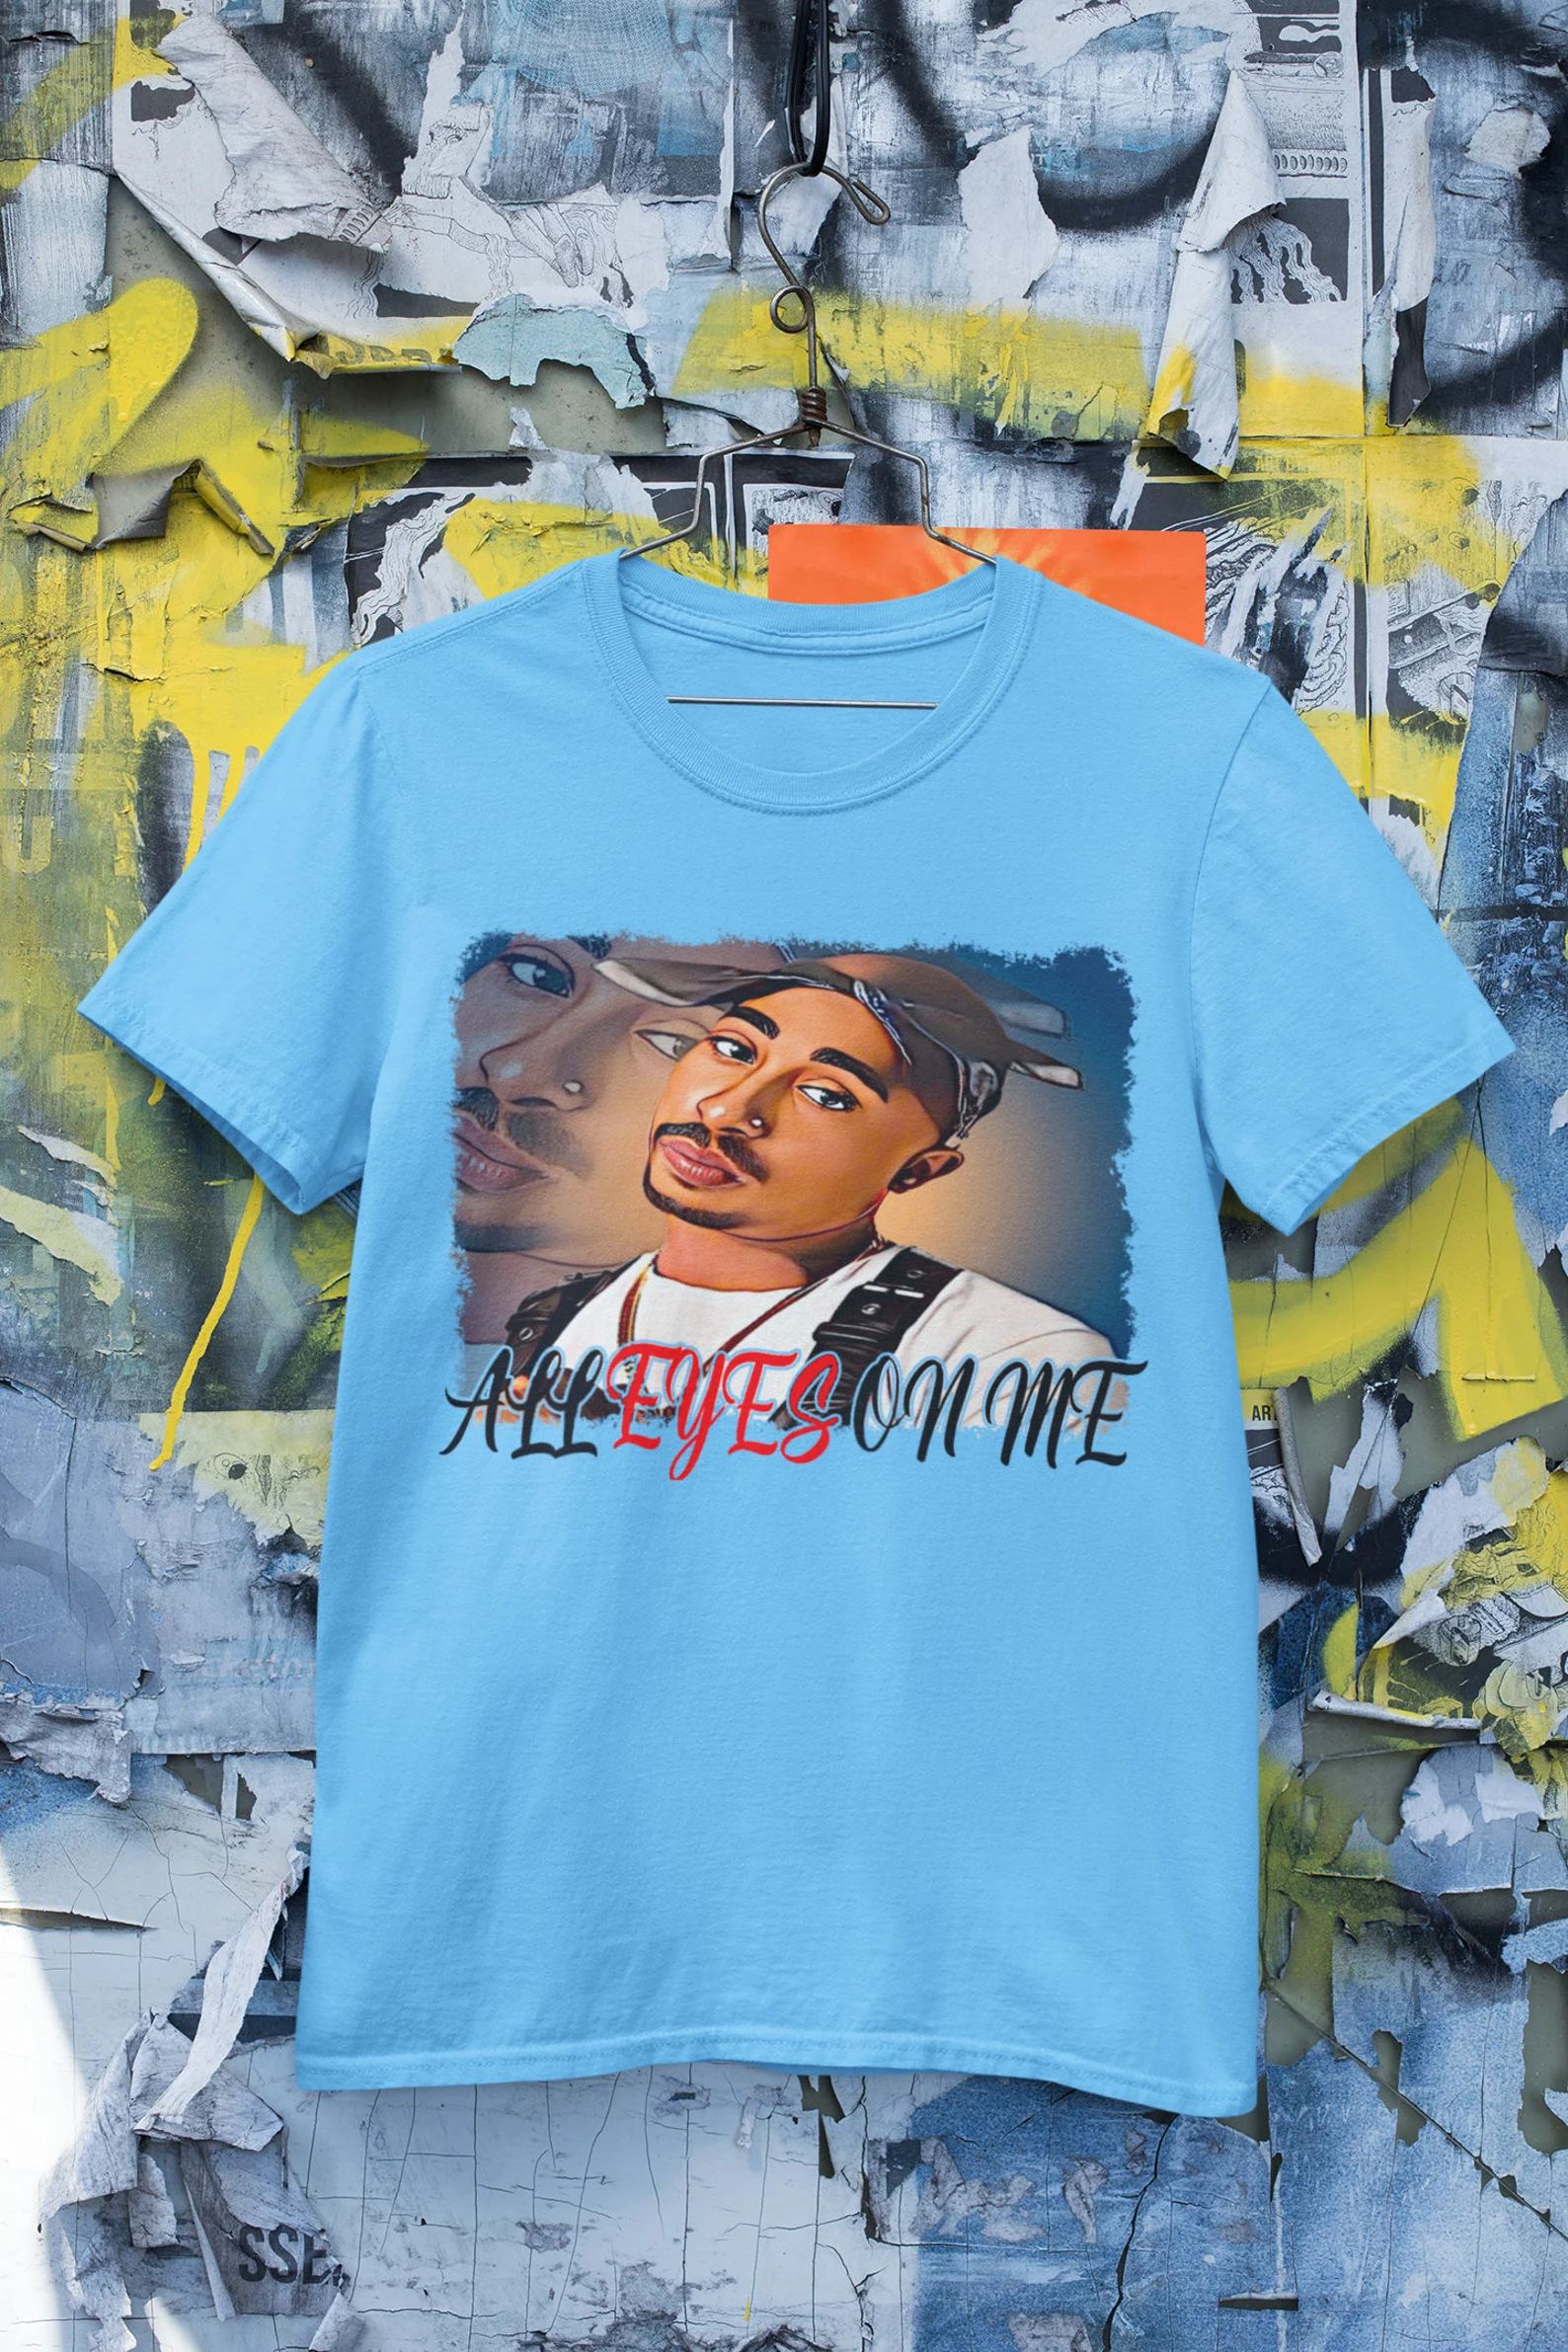 Blue t-shirt with the Tupac face image.